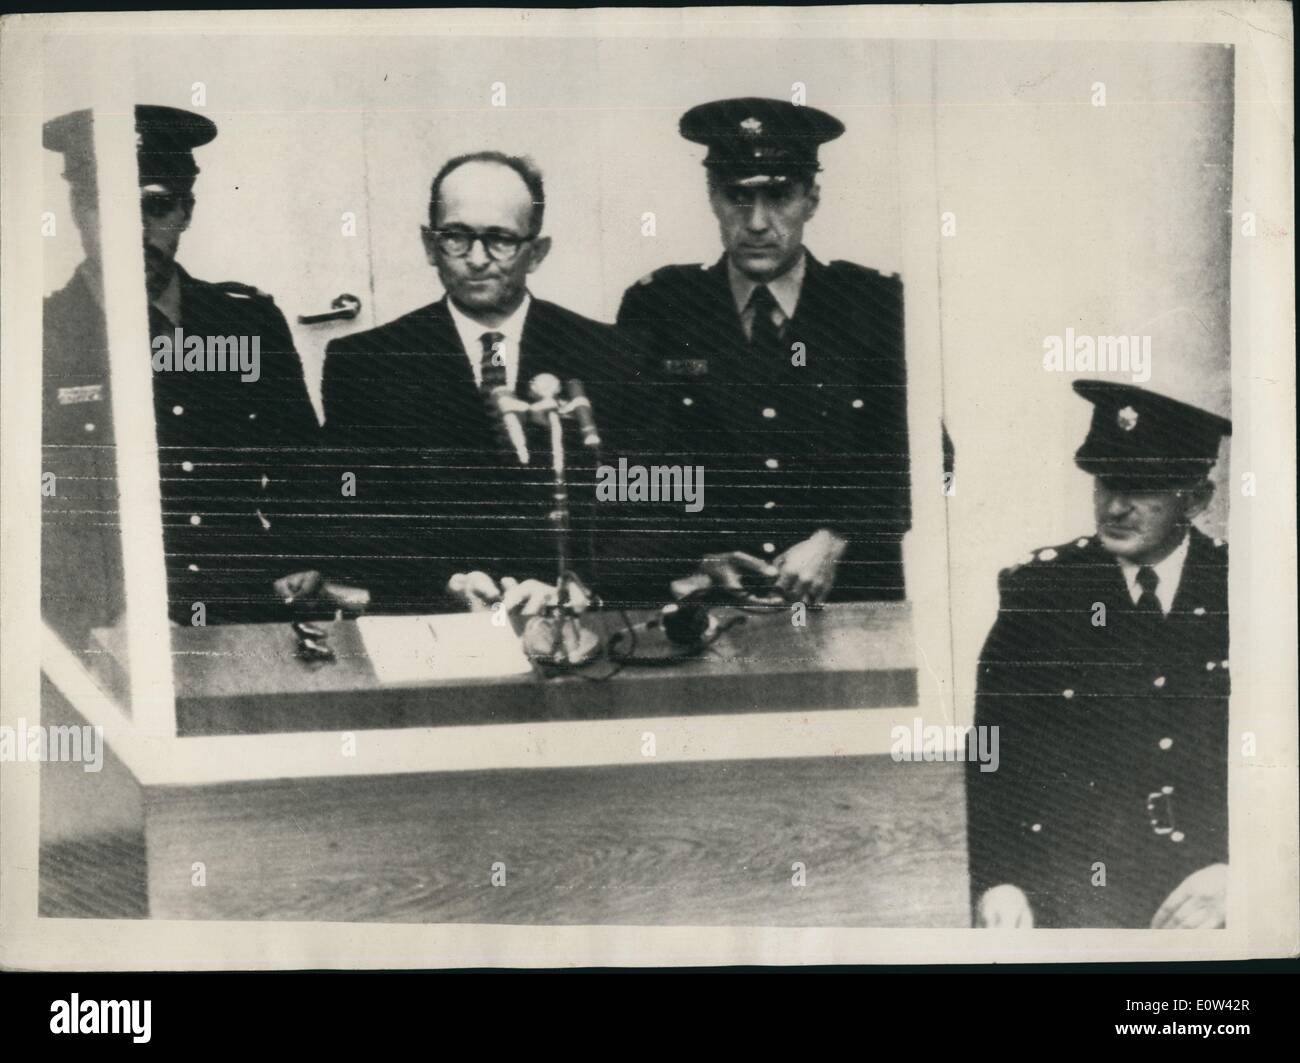 Apr. 04, 1961 - Opening of the Adolf Eichmann trial in Jerusalem. Charged with Mass Murder of the Jews: The trial opened this morning in Jerusalem of Adolf Eichmann former Nazi S.S. Colonel on charges of the mann murder of millions of Jews in concentration camps during the war. Photo Shows Well guarded with a policeman on either side of him Adolf Eichmann seen in his special bullet proof dock at the opening of his trial in Jerusalem this morning. Stock Photo